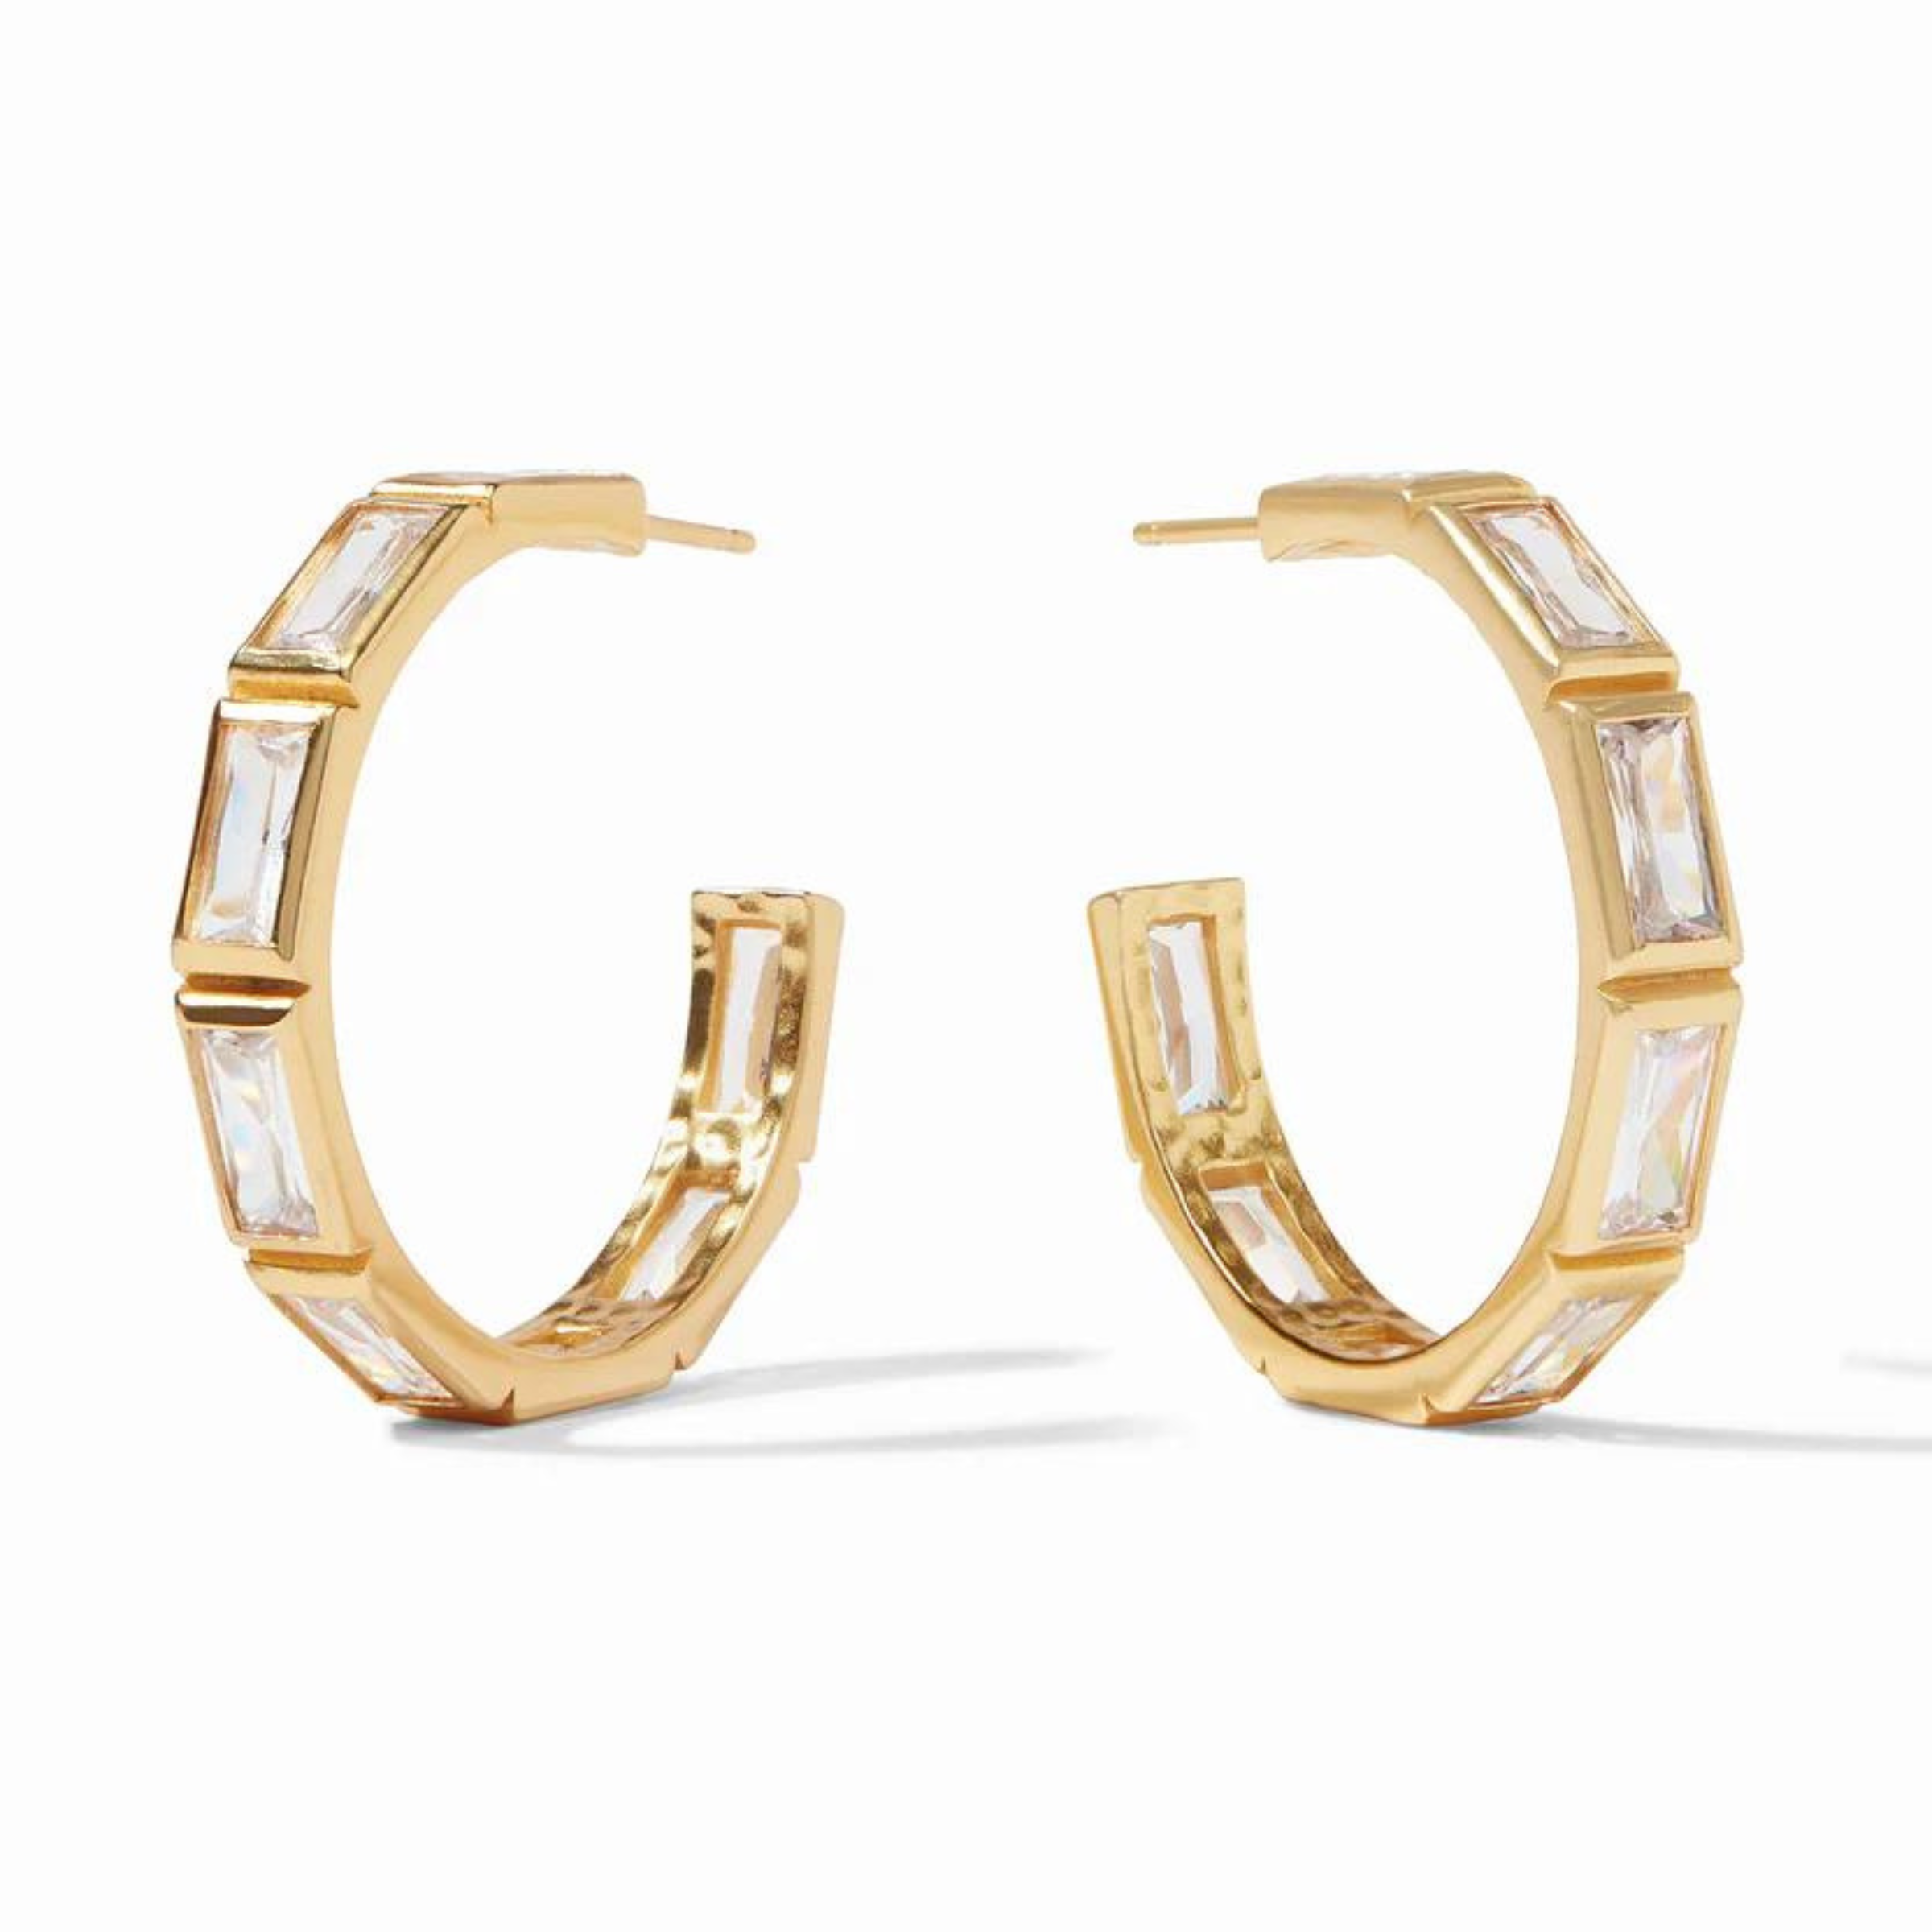 Gold hoop earrings with clear, rectangle crystals pictured on a white background. 